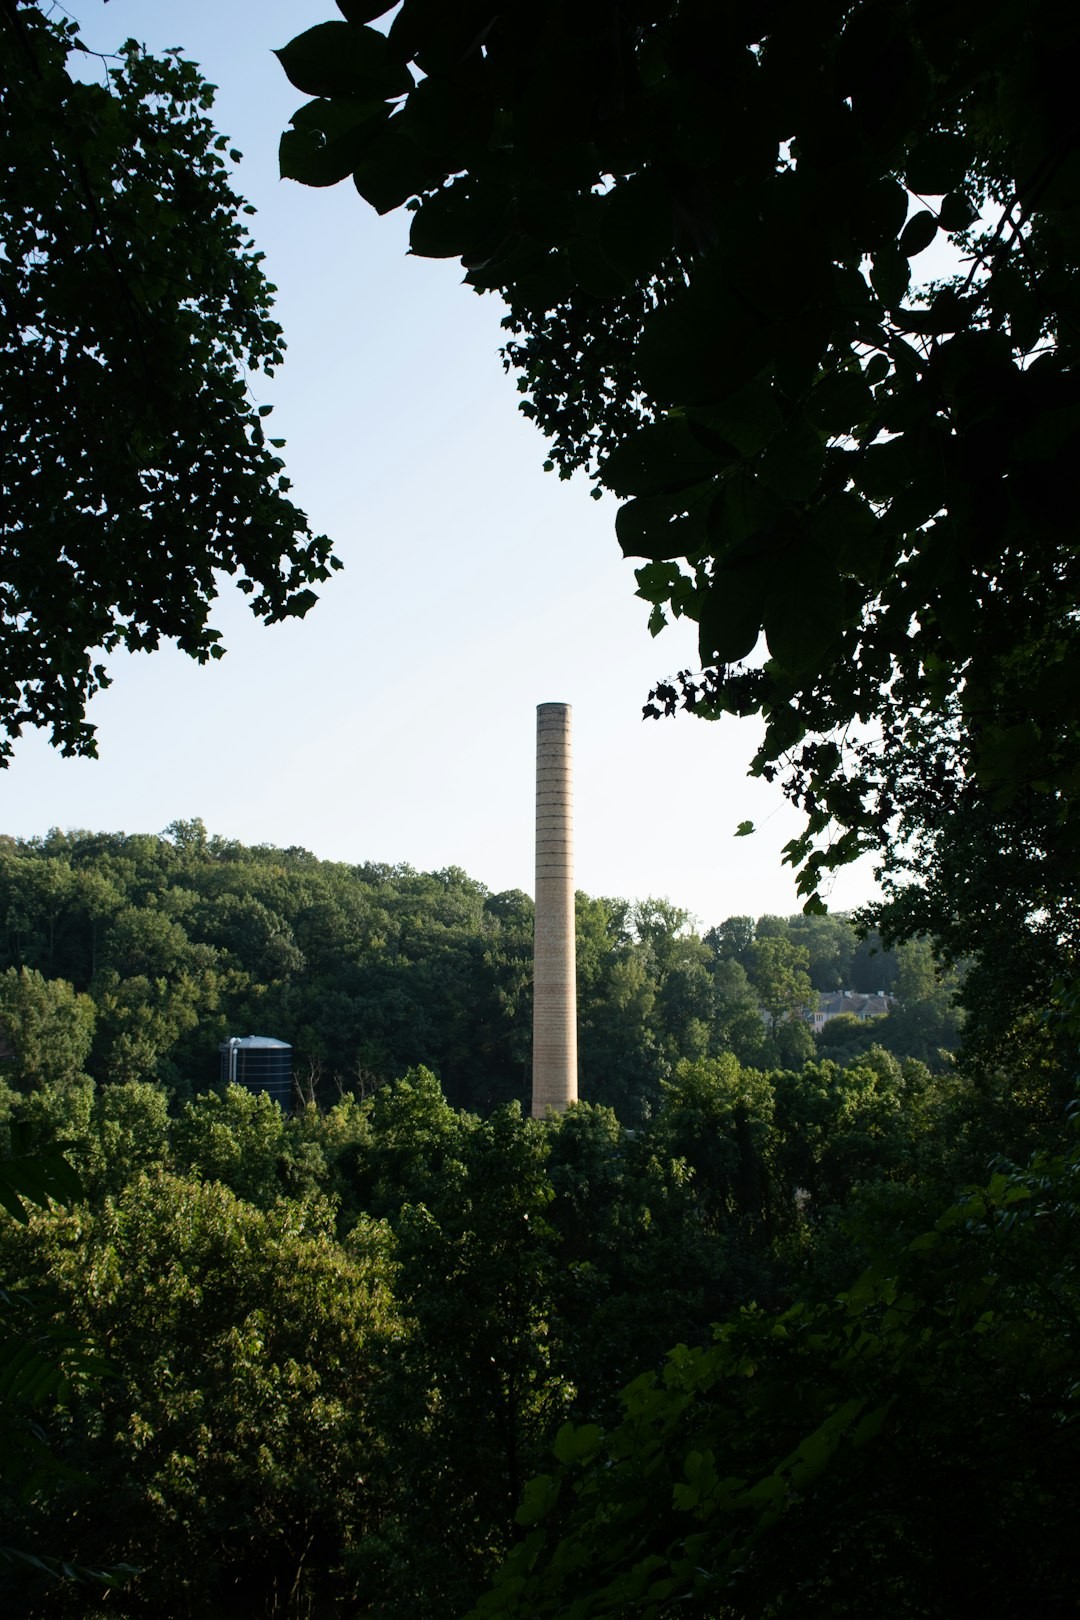 Historical Bancroft mills production industry factory smoke stack located in Wilmington Delaware at alapocas state park